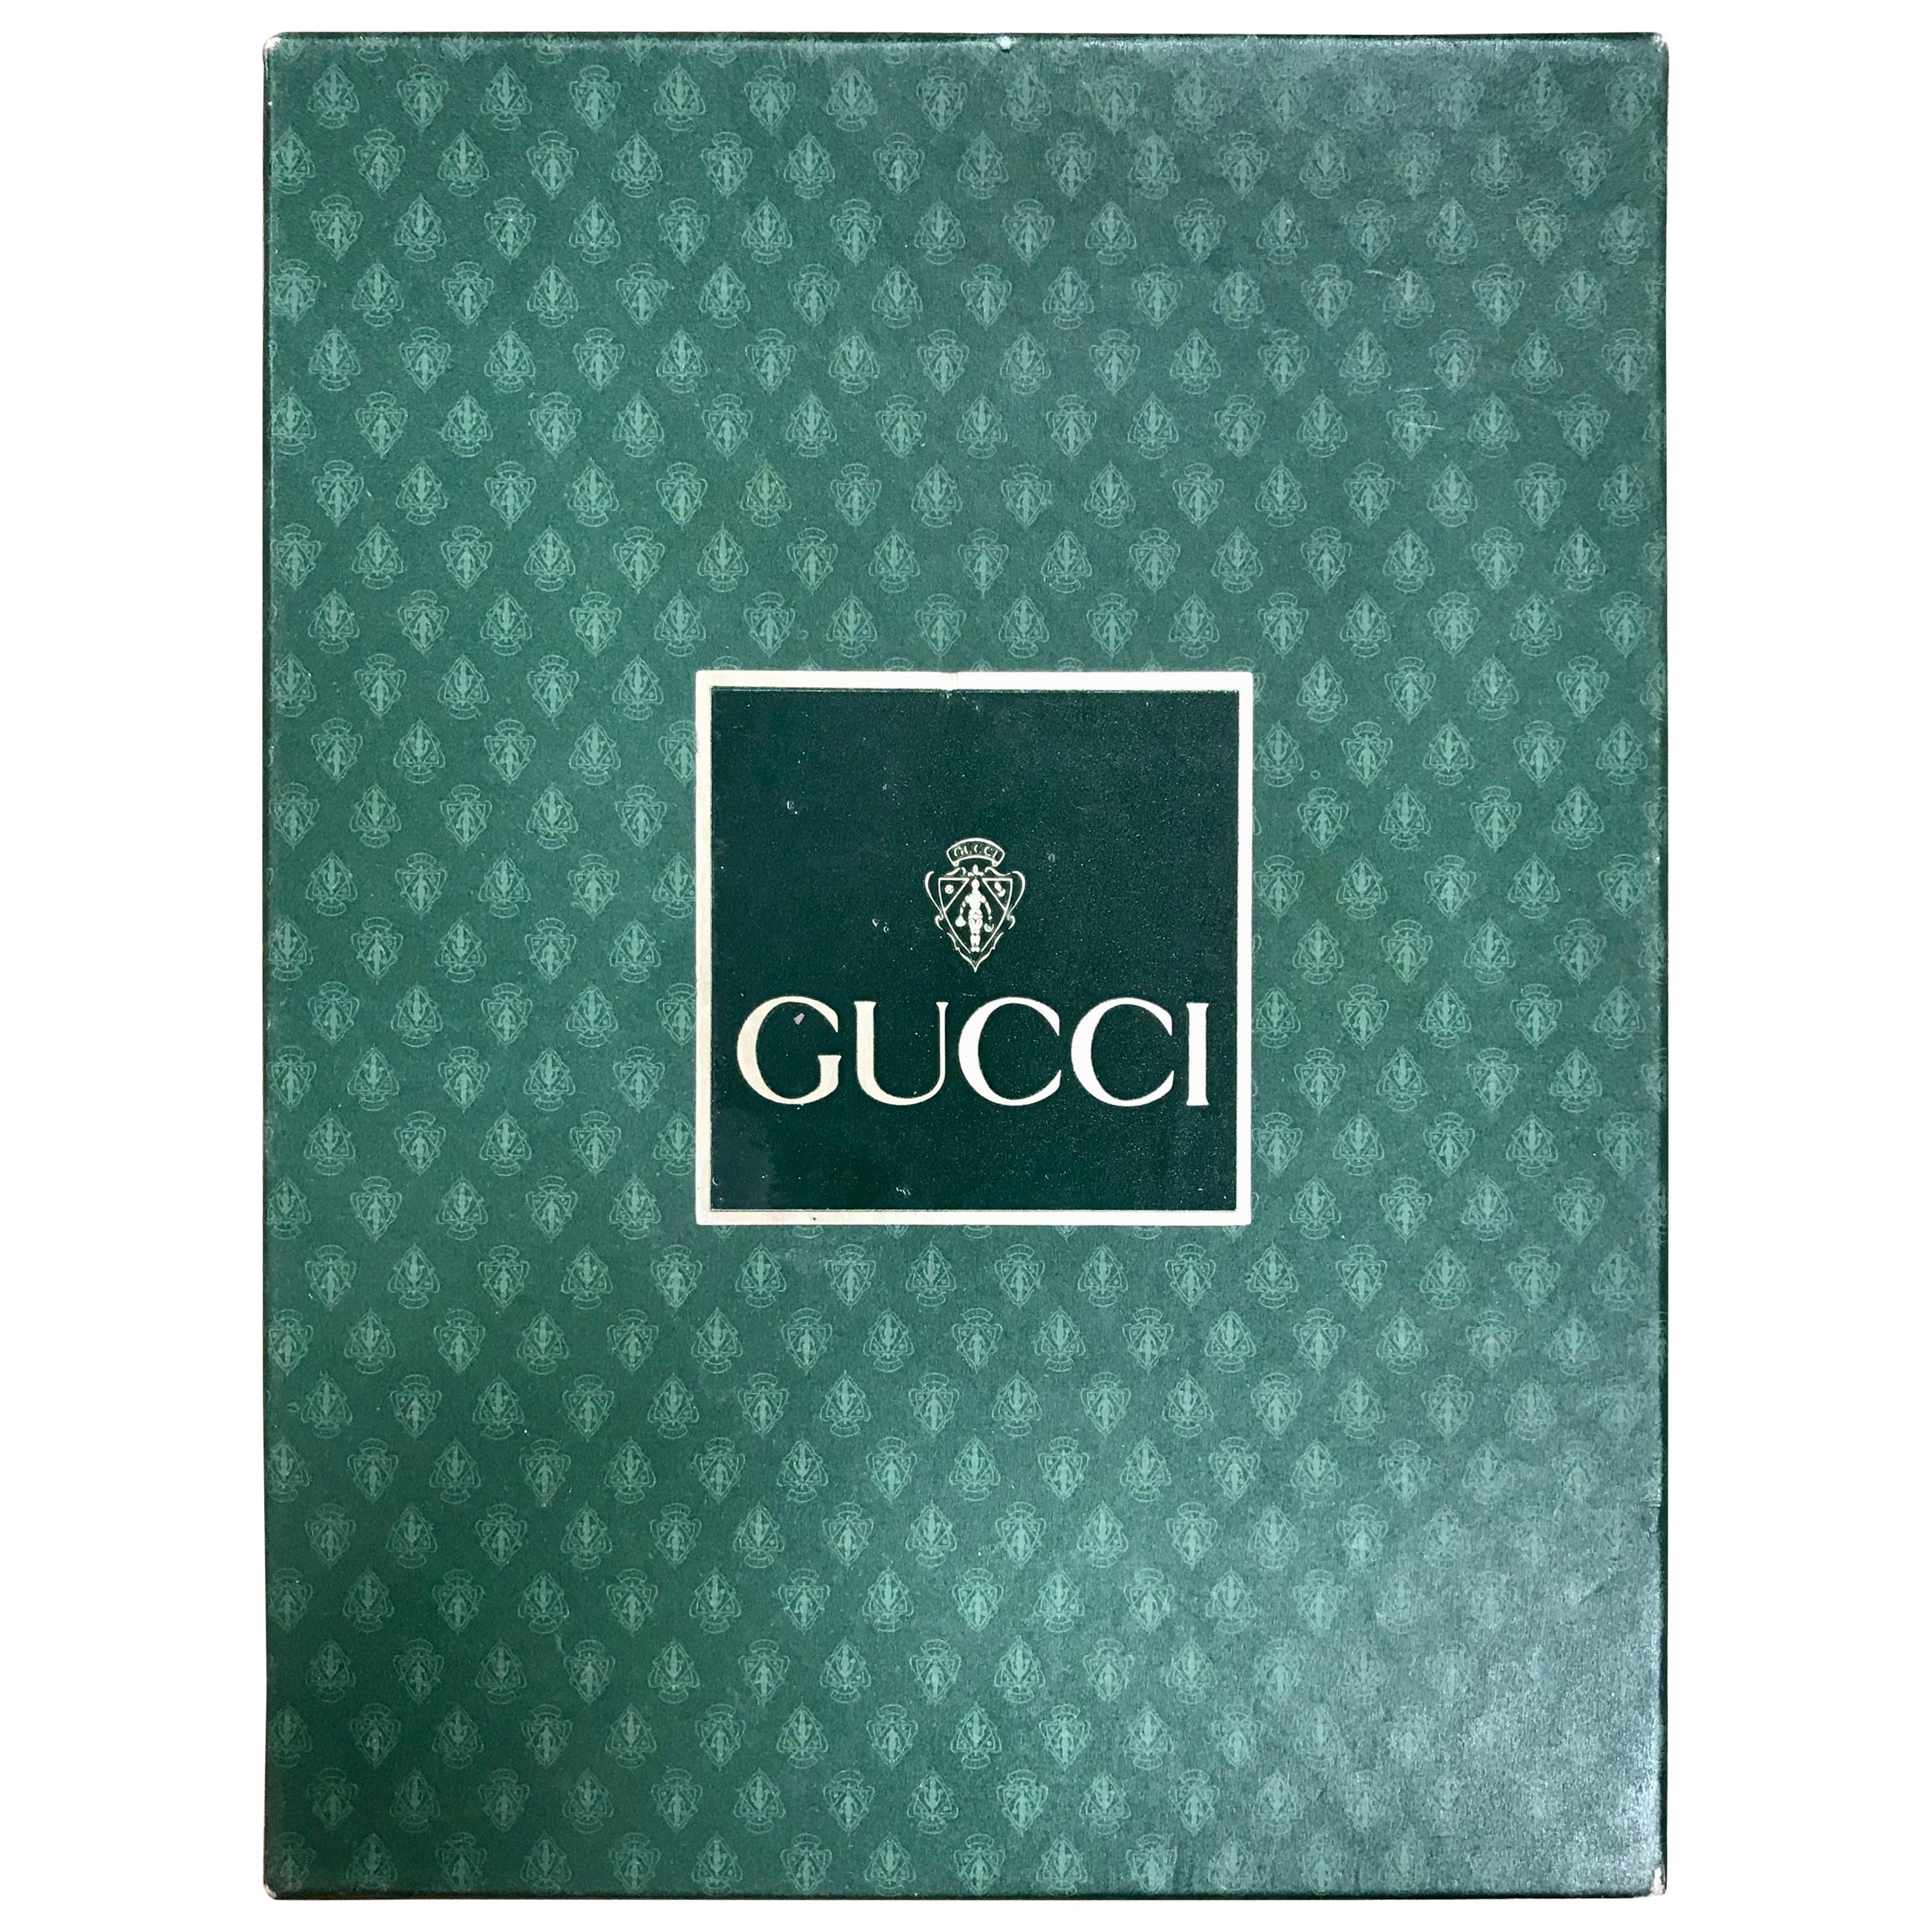 Gucci Vintage Agenda Phone/Address Notebook, Italy, 1980s